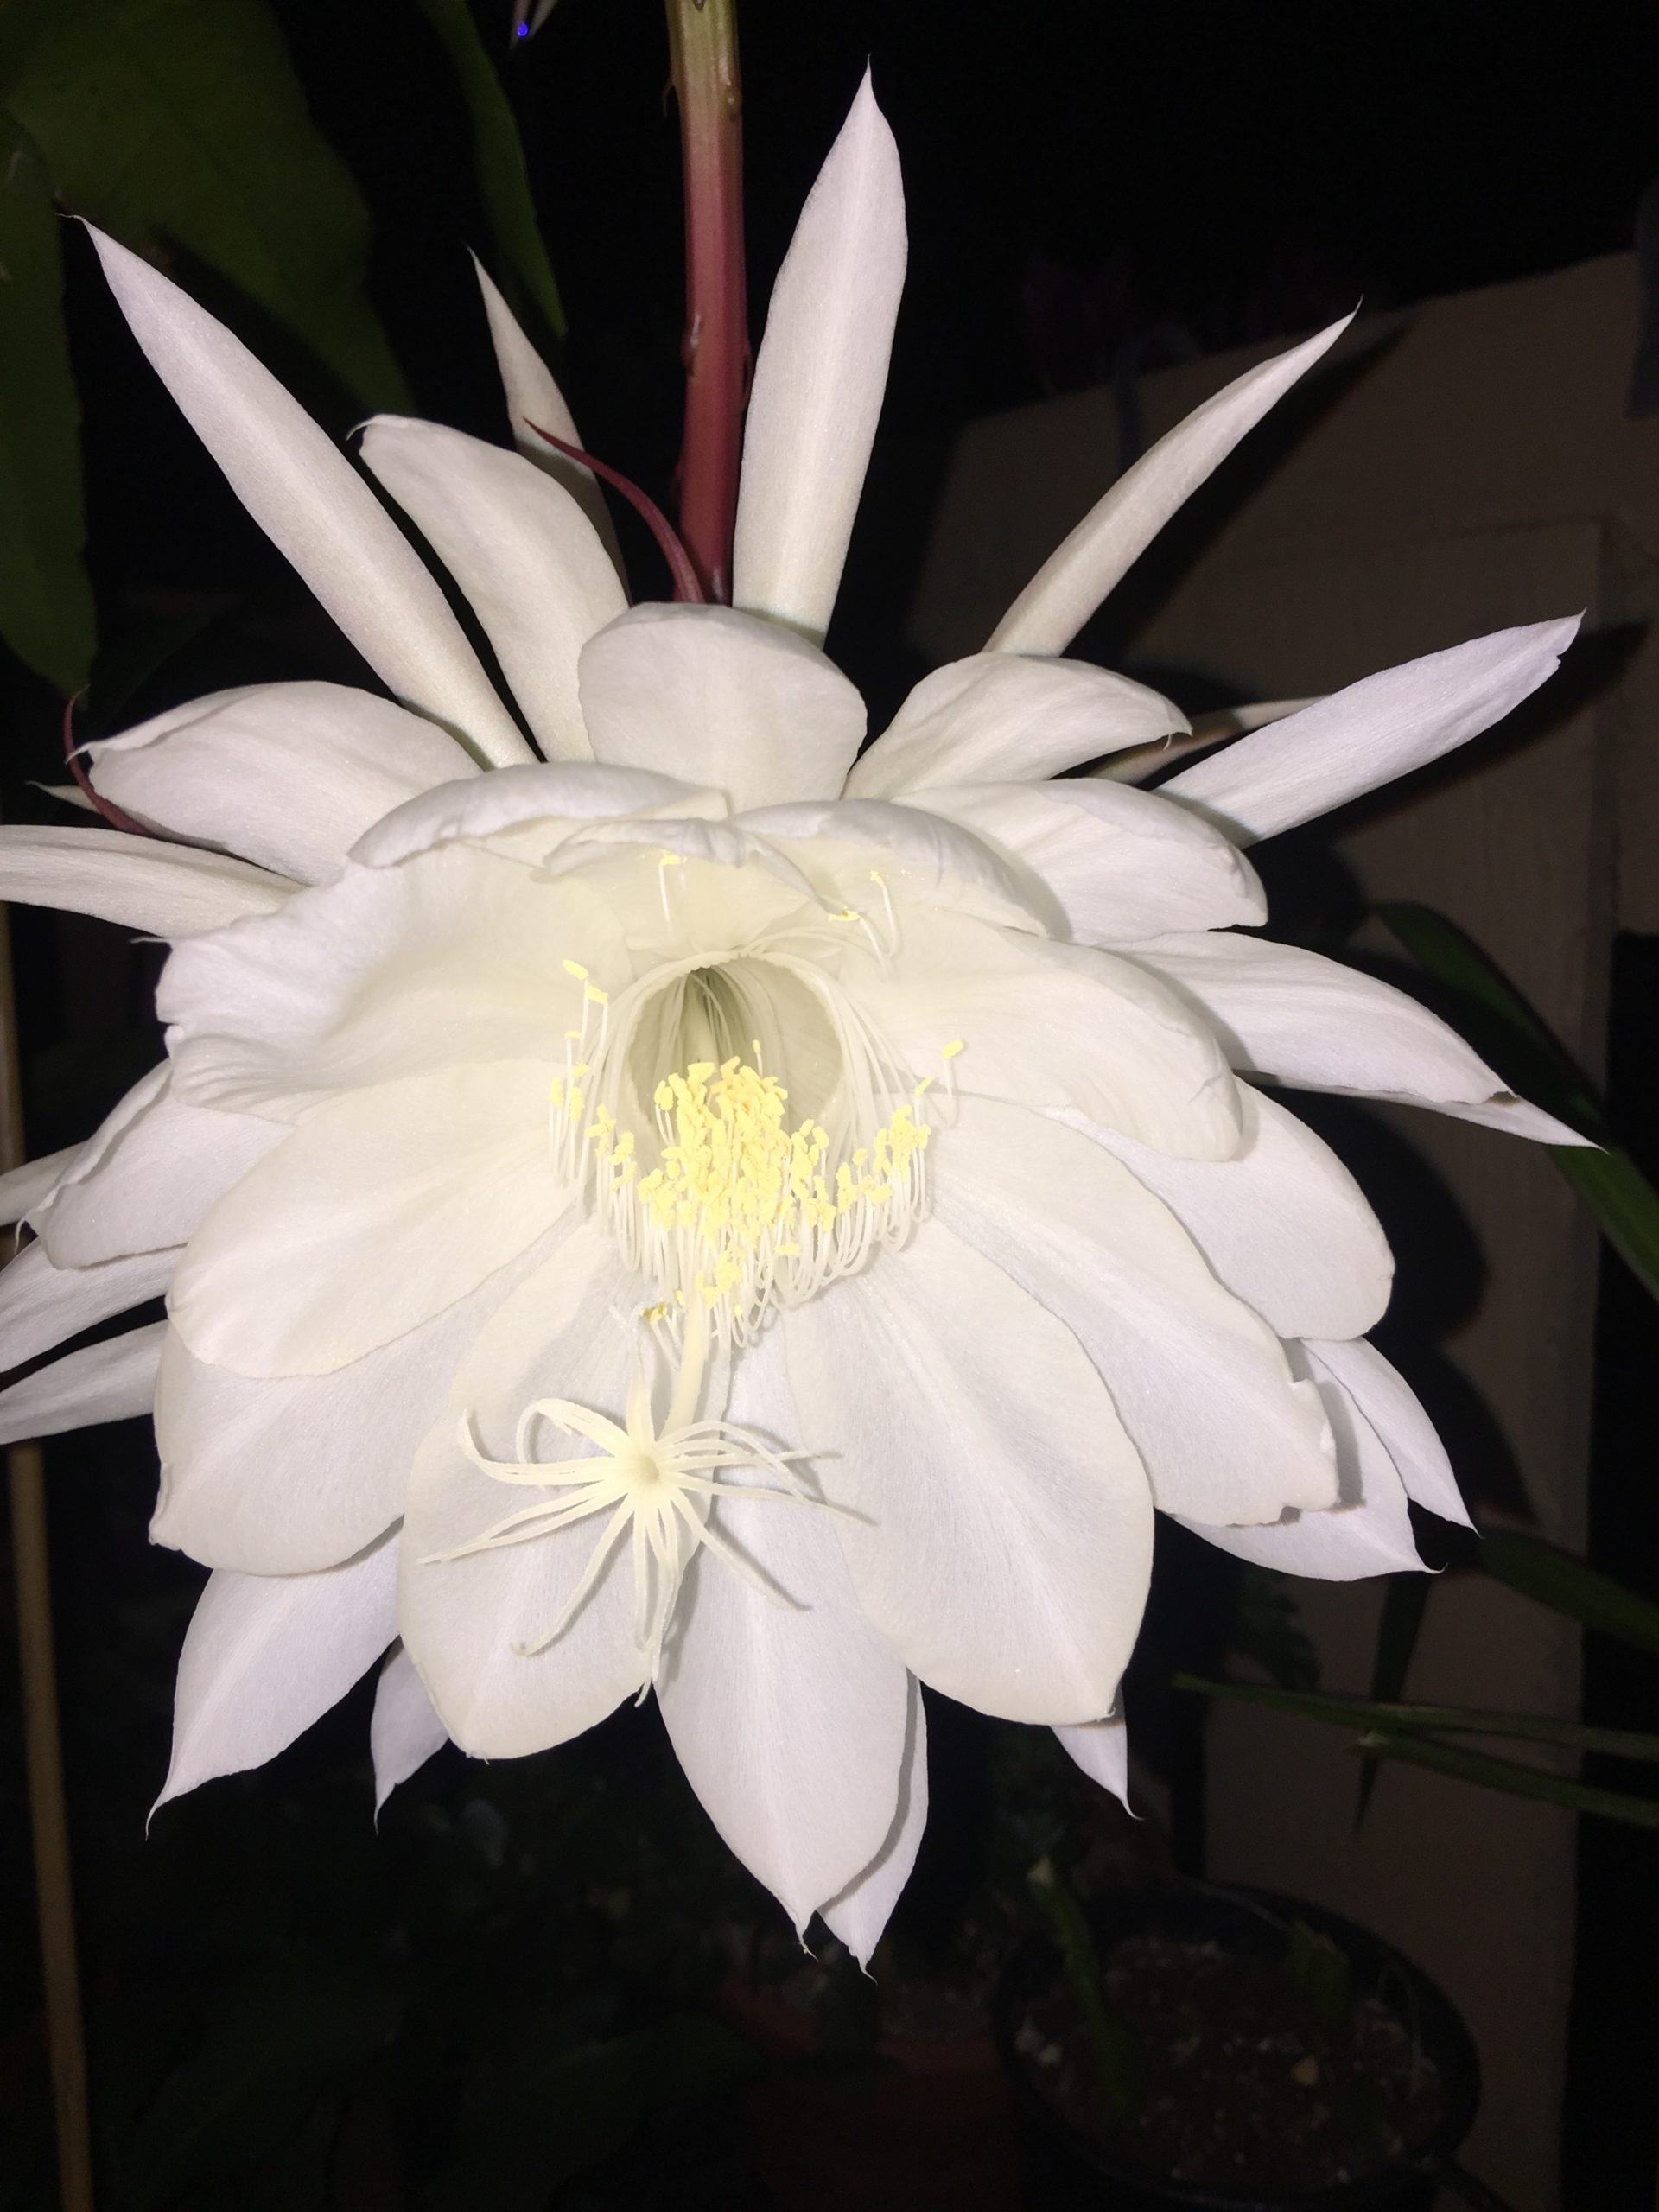 Queen of the night flower plant ($) - Galora